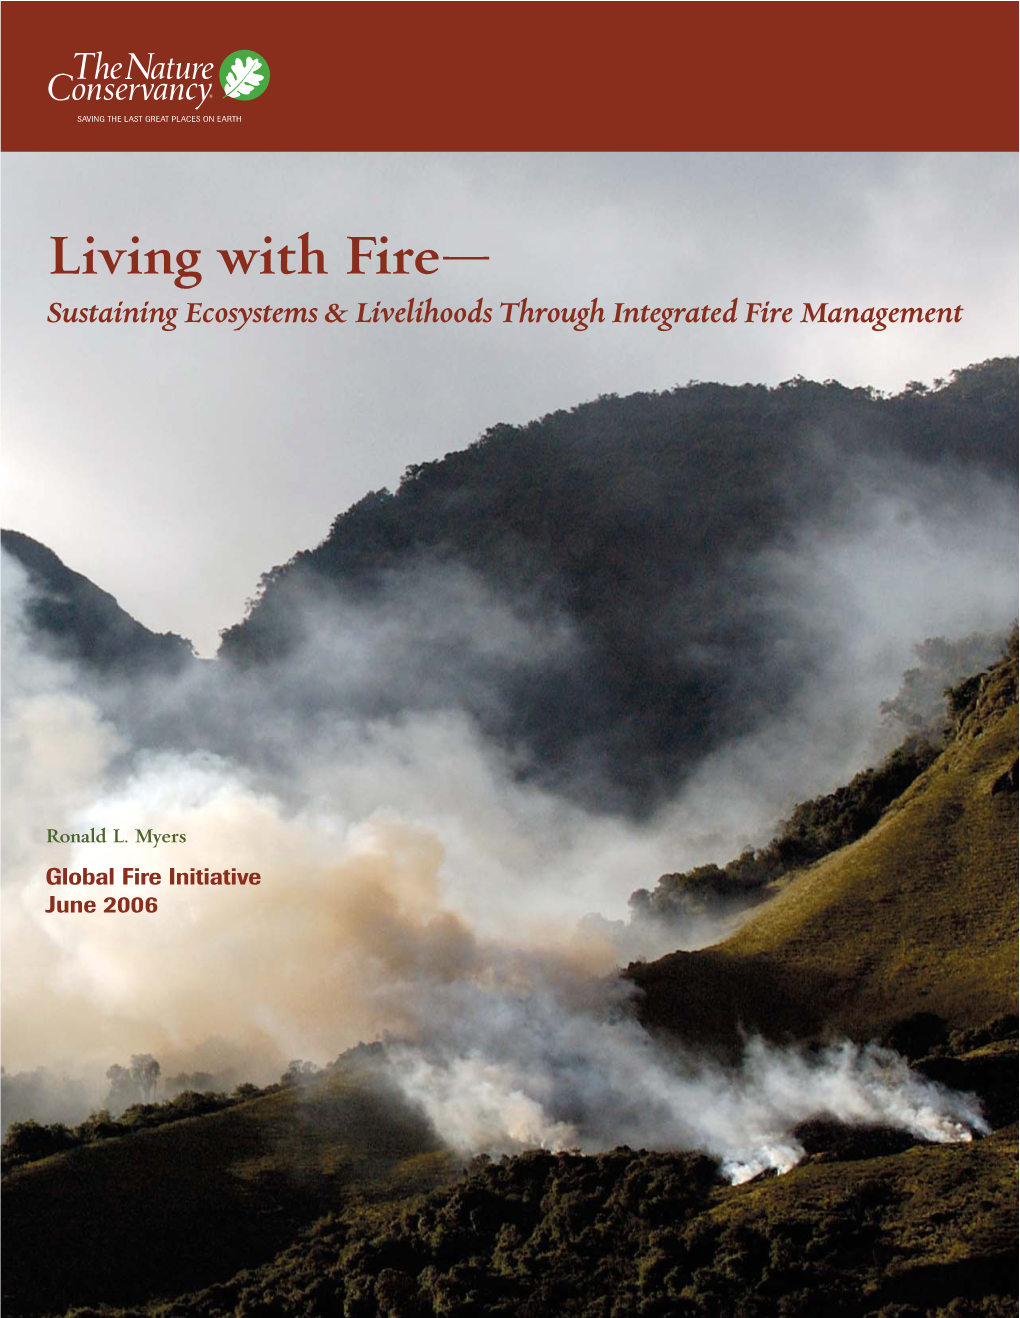 Living with Fire— Sustaining Ecosystems & Livelihoods Through Integrated Fire Management